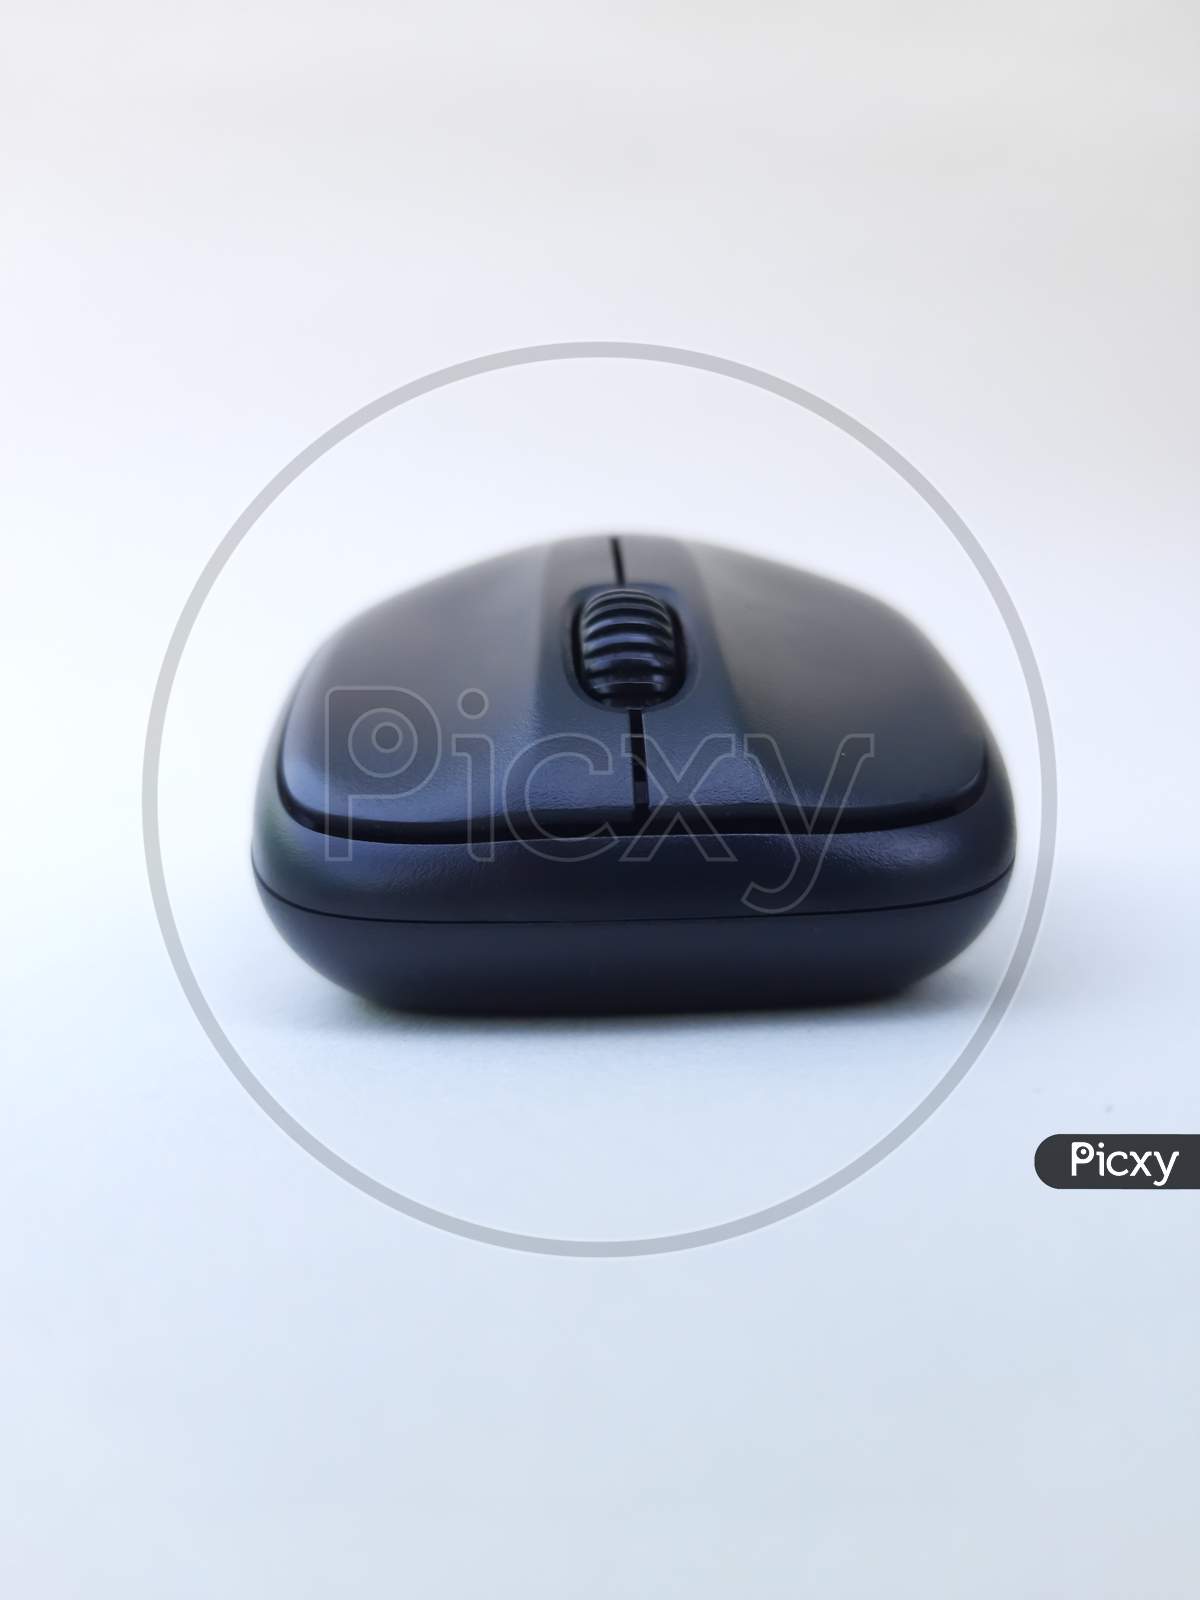 Black computer mouse isolated on white background.